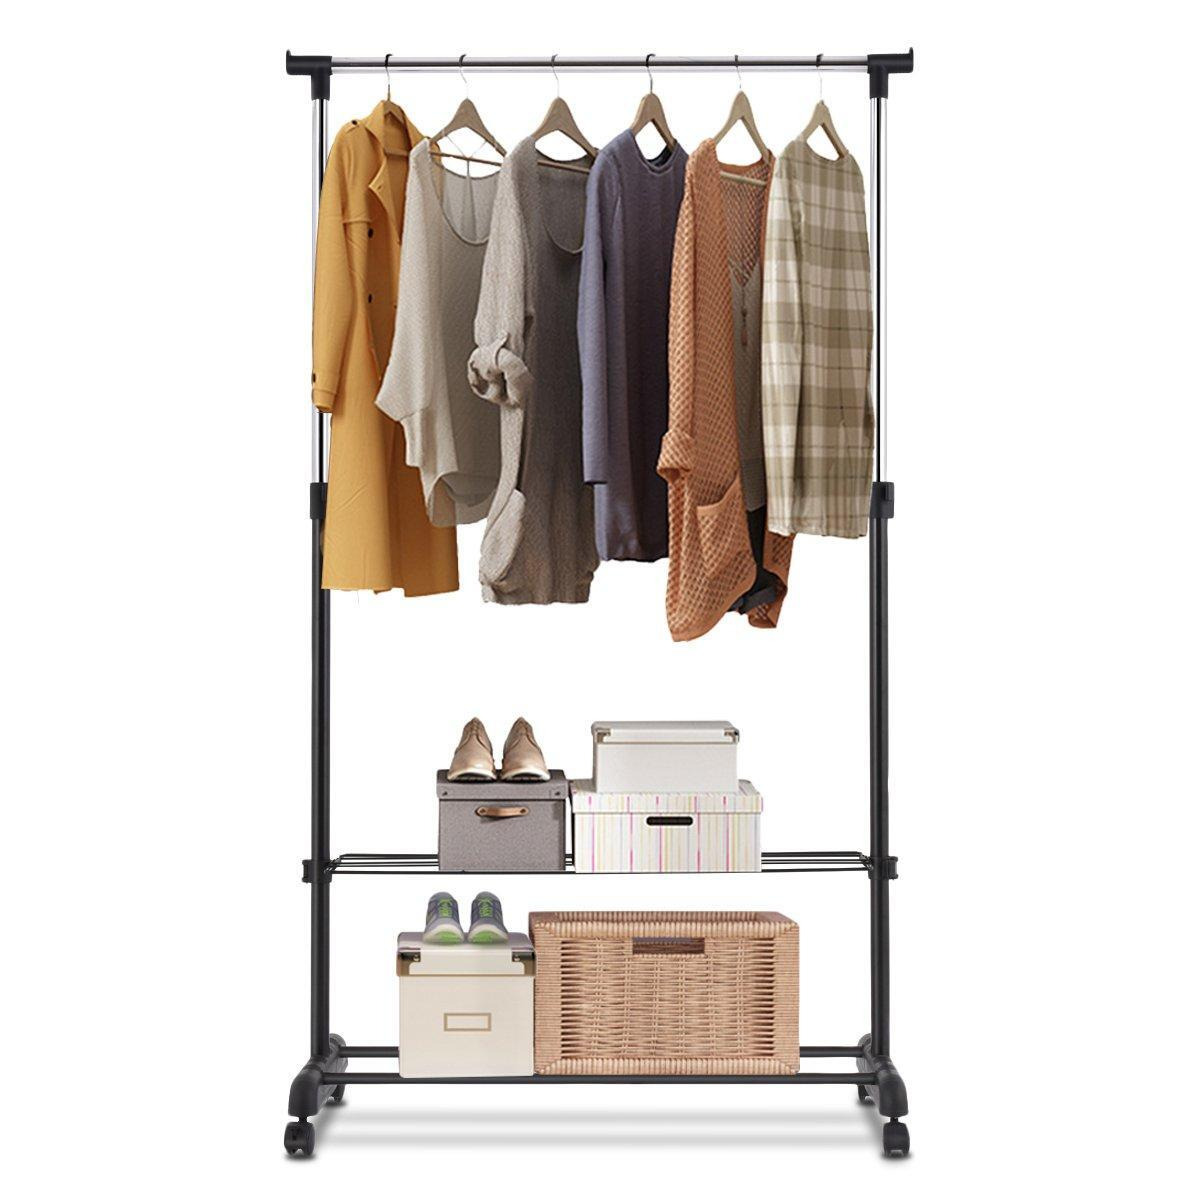 2 in 1 Clothes Rack Freestanding W/ Shoe Rack & Clothes Rail Height-adjustable - image 1